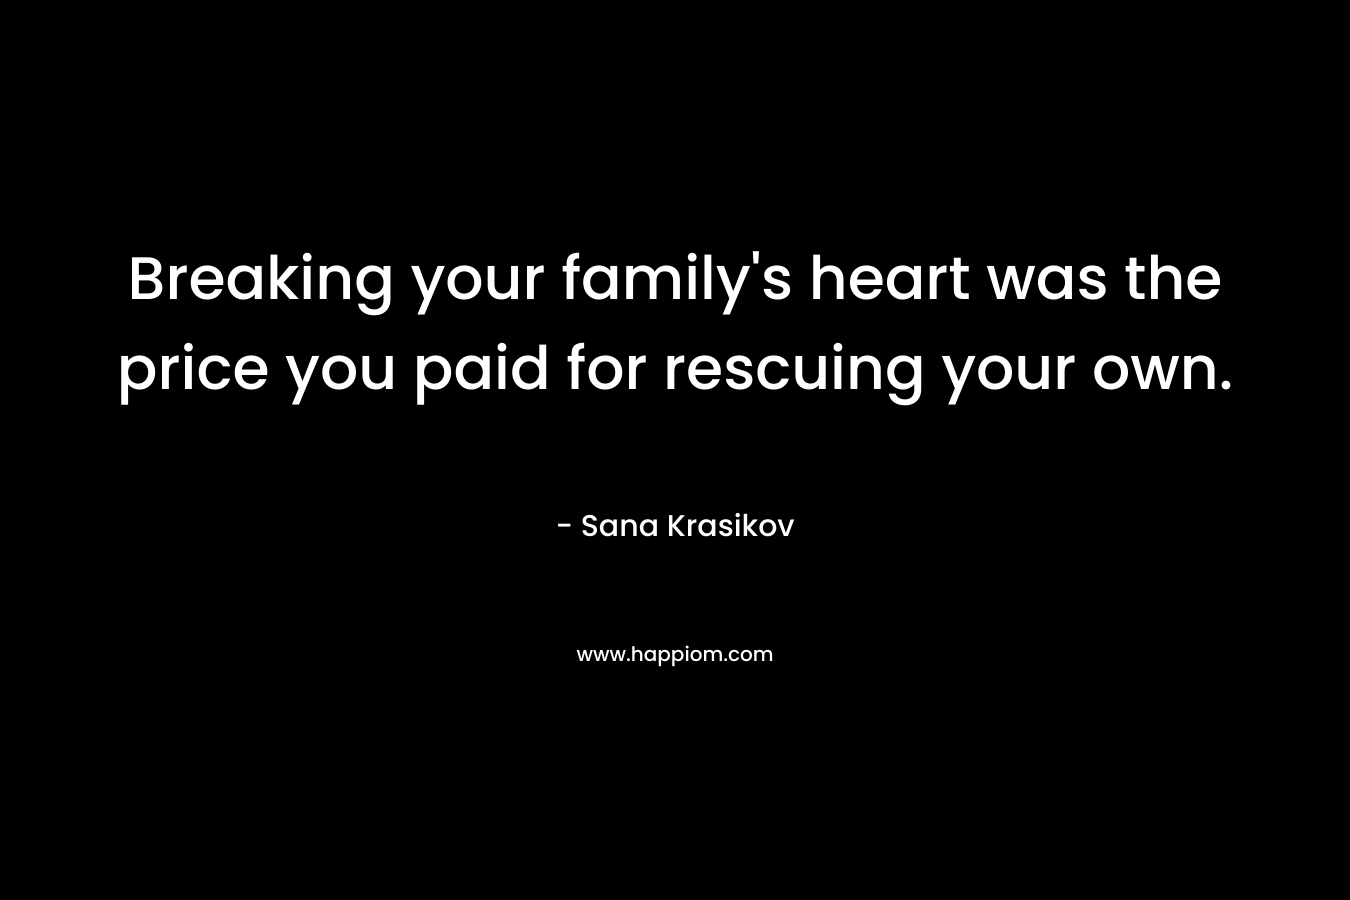 Breaking your family’s heart was the price you paid for rescuing your own. – Sana Krasikov